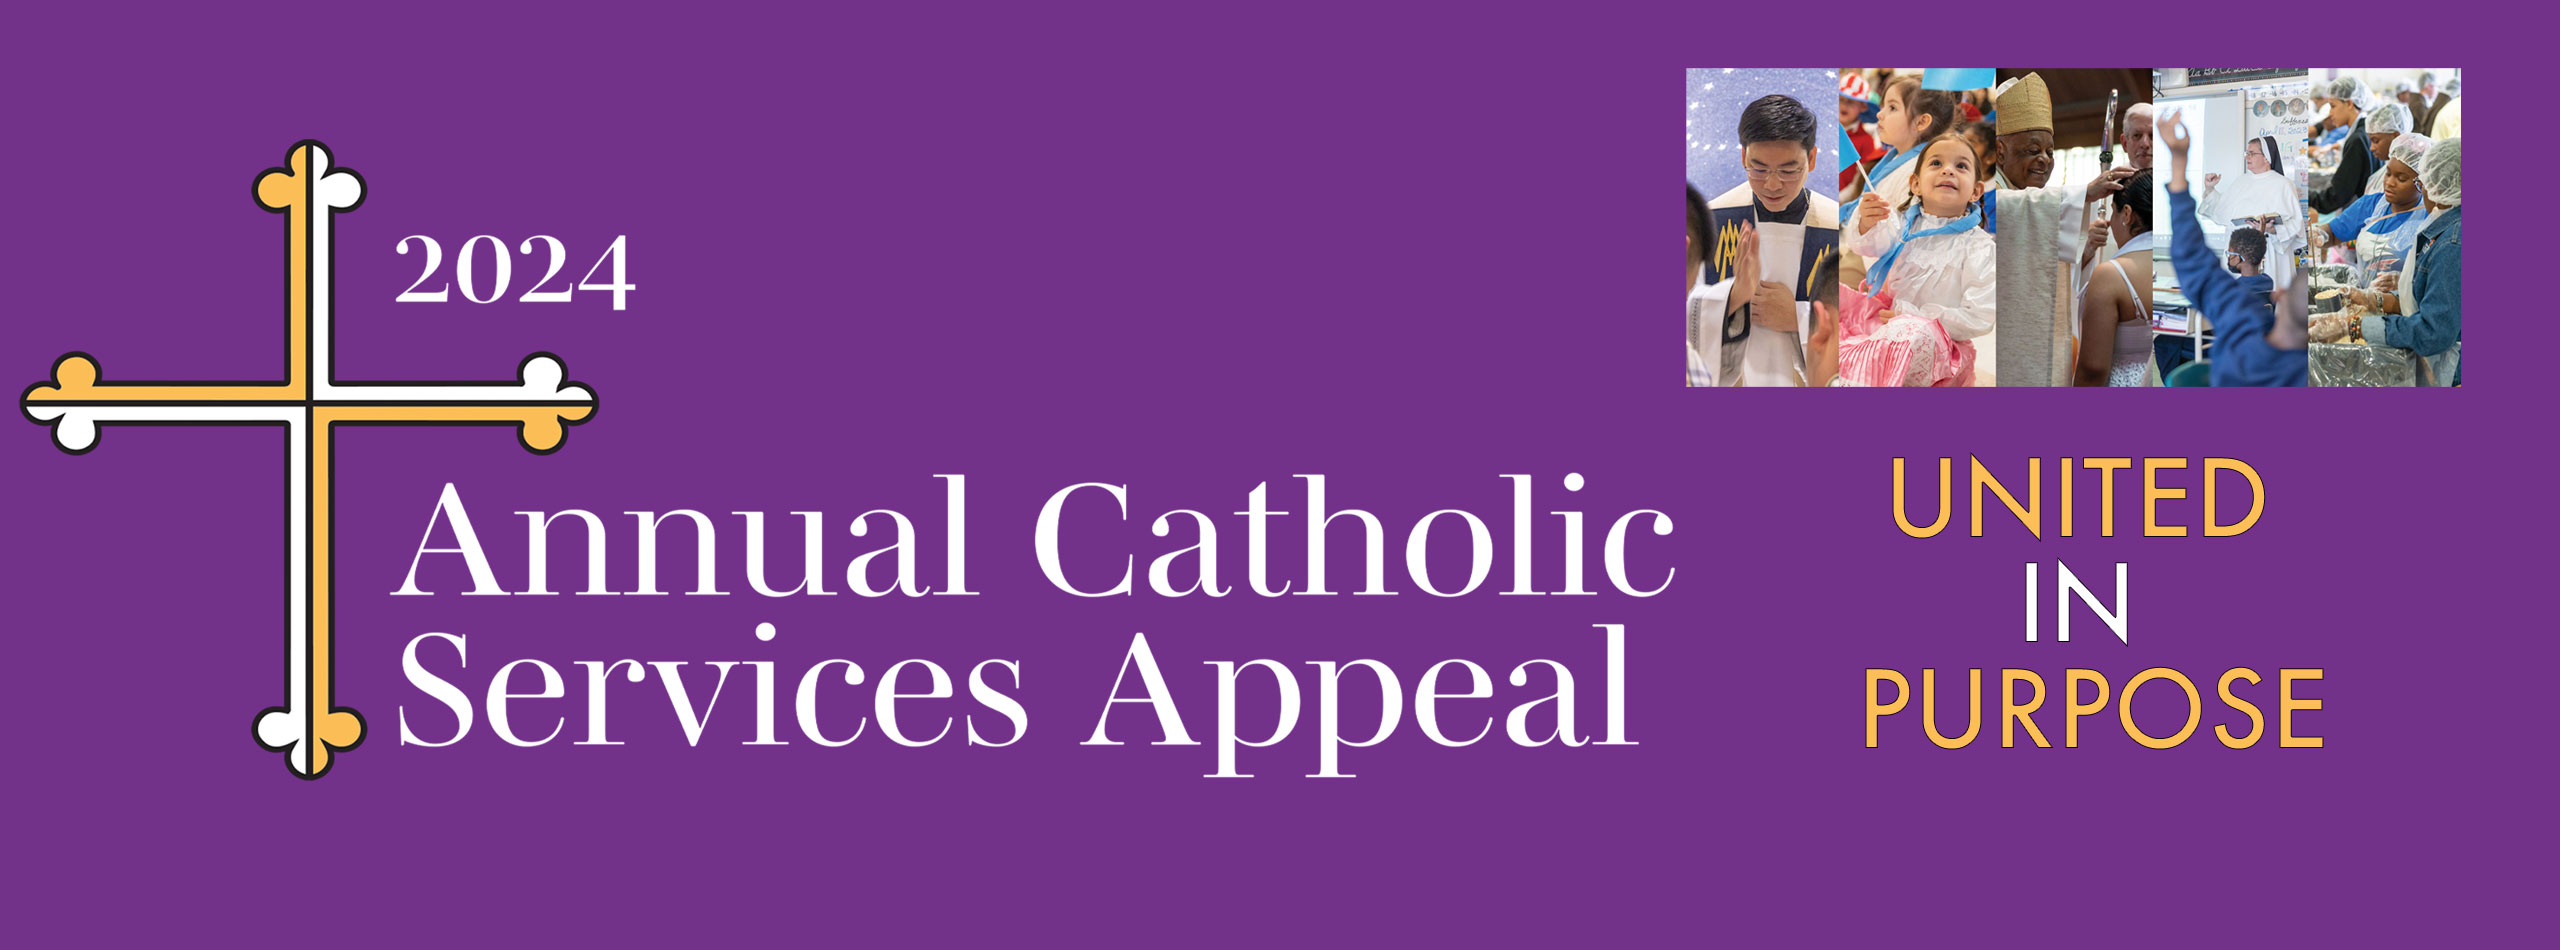 Annual Catholic Services Appeal